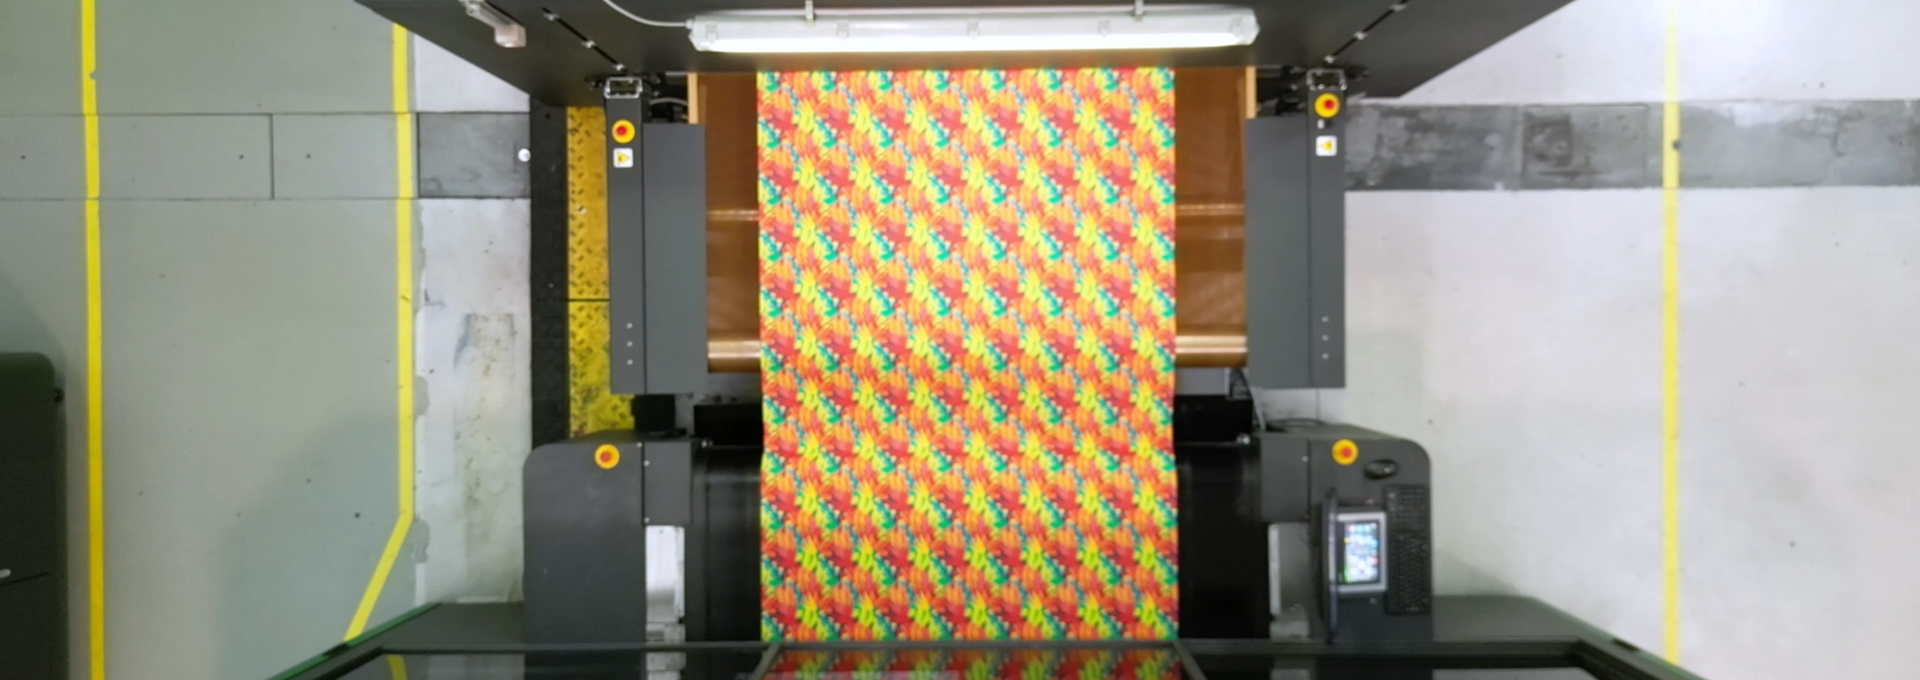 Textile printing in one simple step